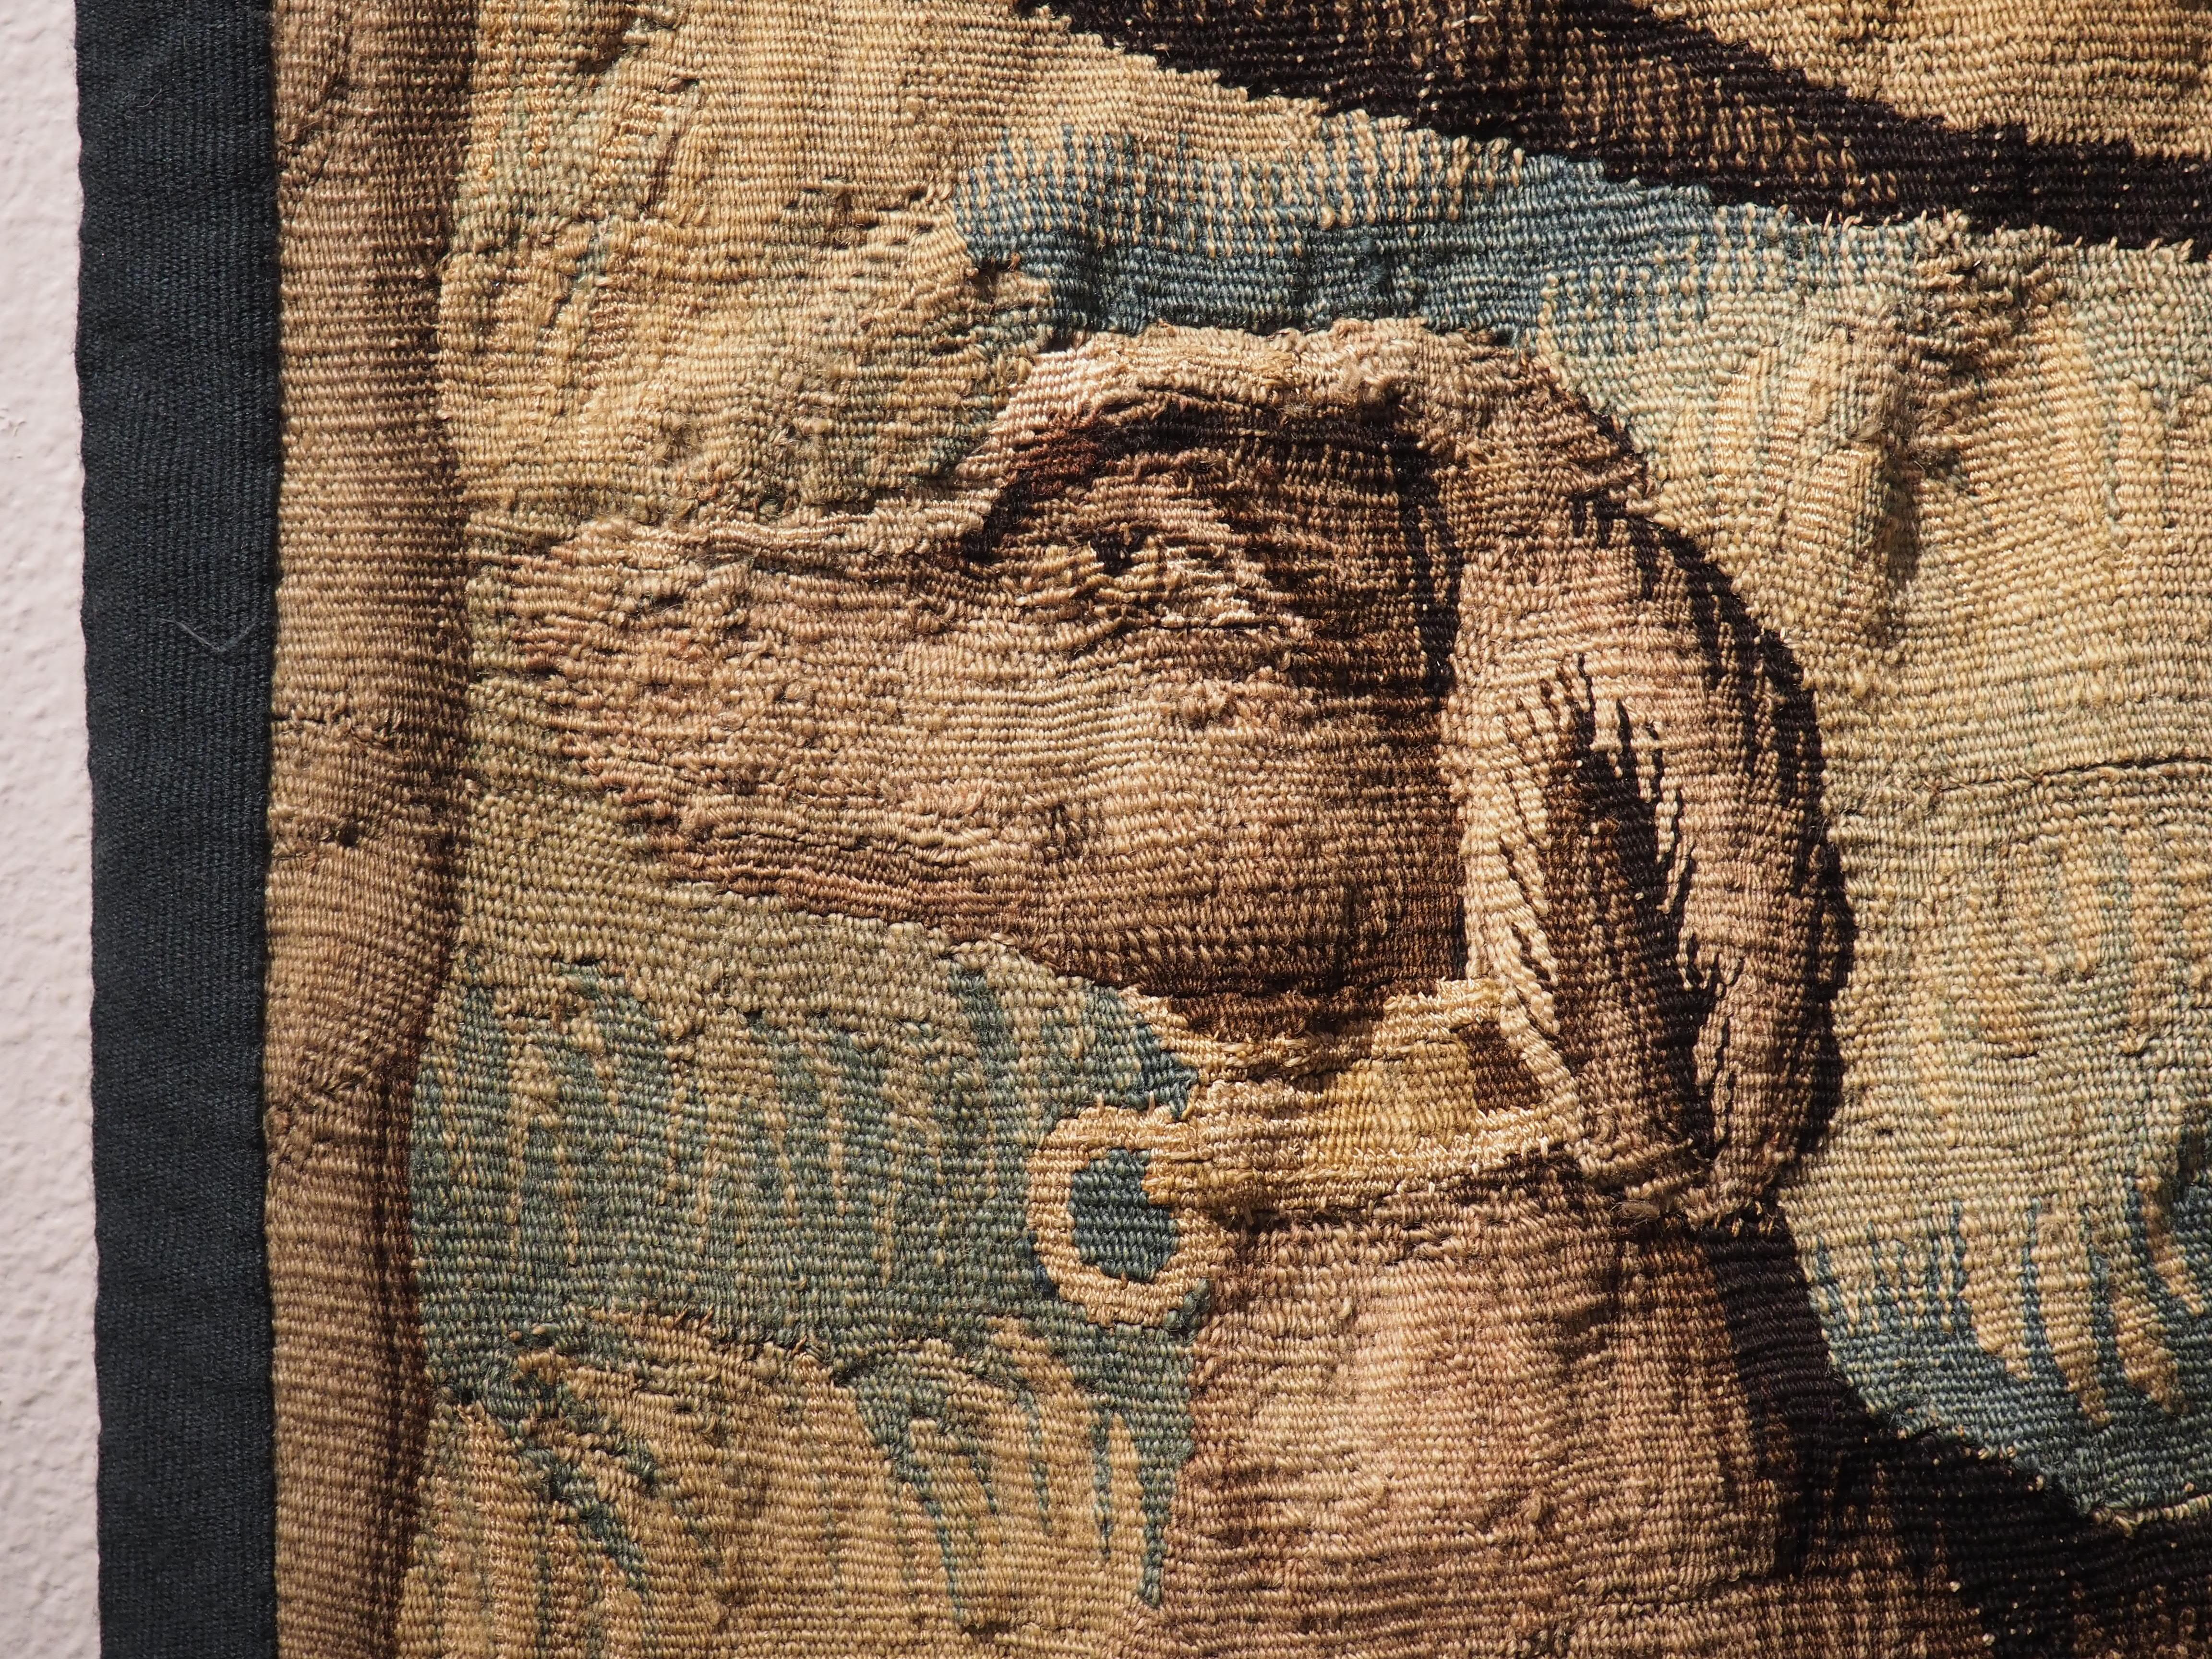 Dutch 17th Century Tapestry Fragment from Flanders, the Flight into Egypt